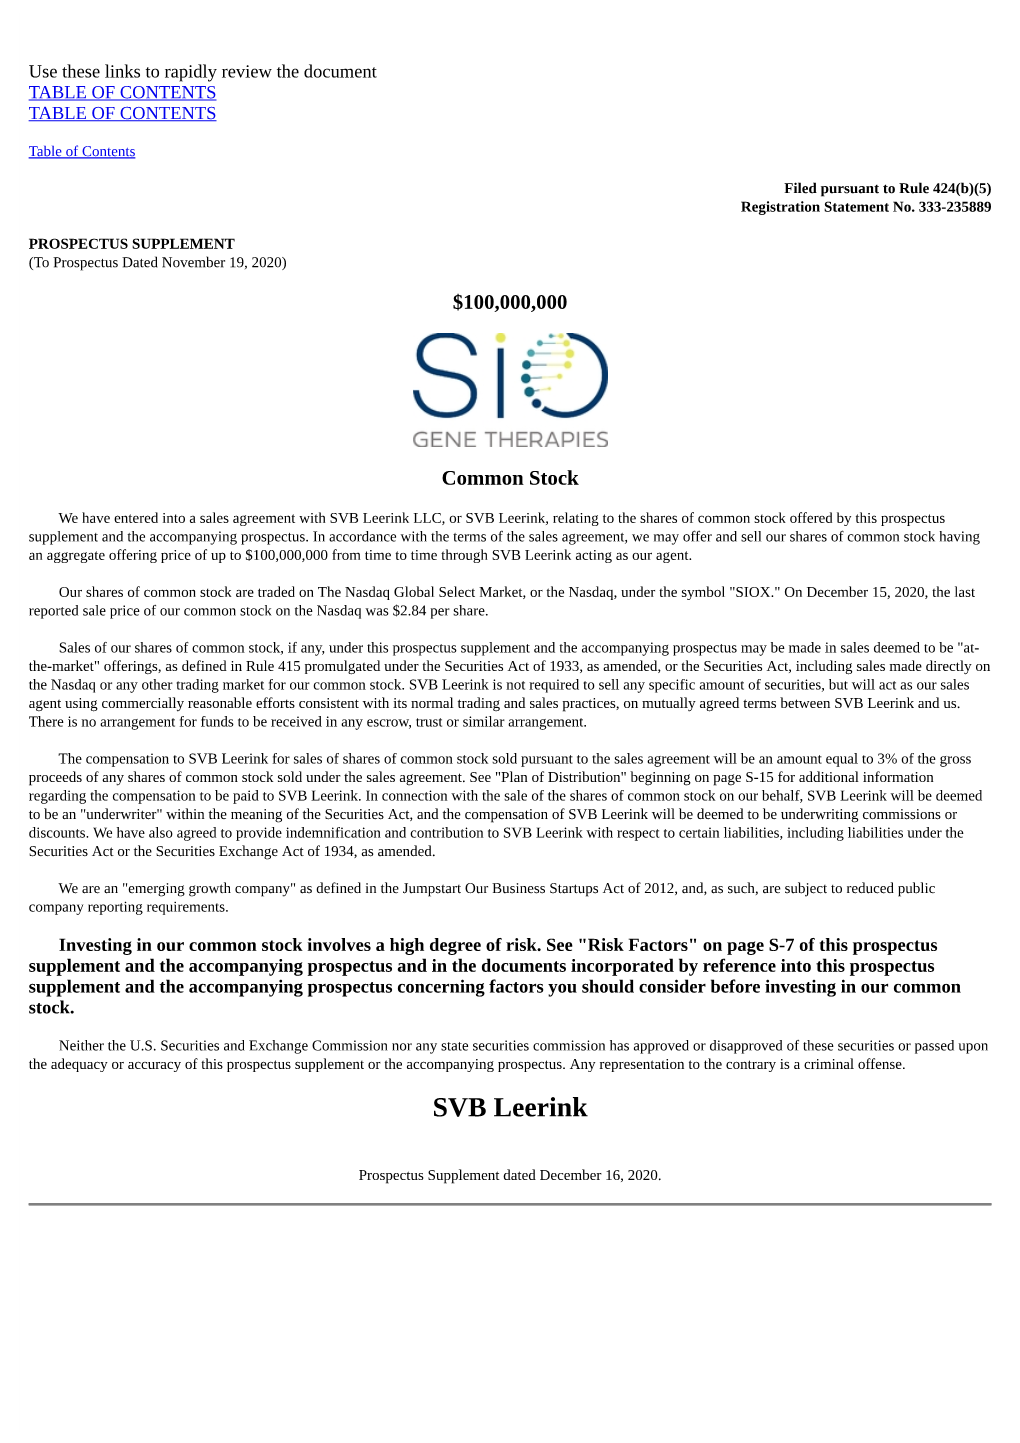 SVB Leerink LLC, Or SVB Leerink, Relating to the Shares of Common Stock Offered by This Prospectus Supplement and the Accompanying Prospectus